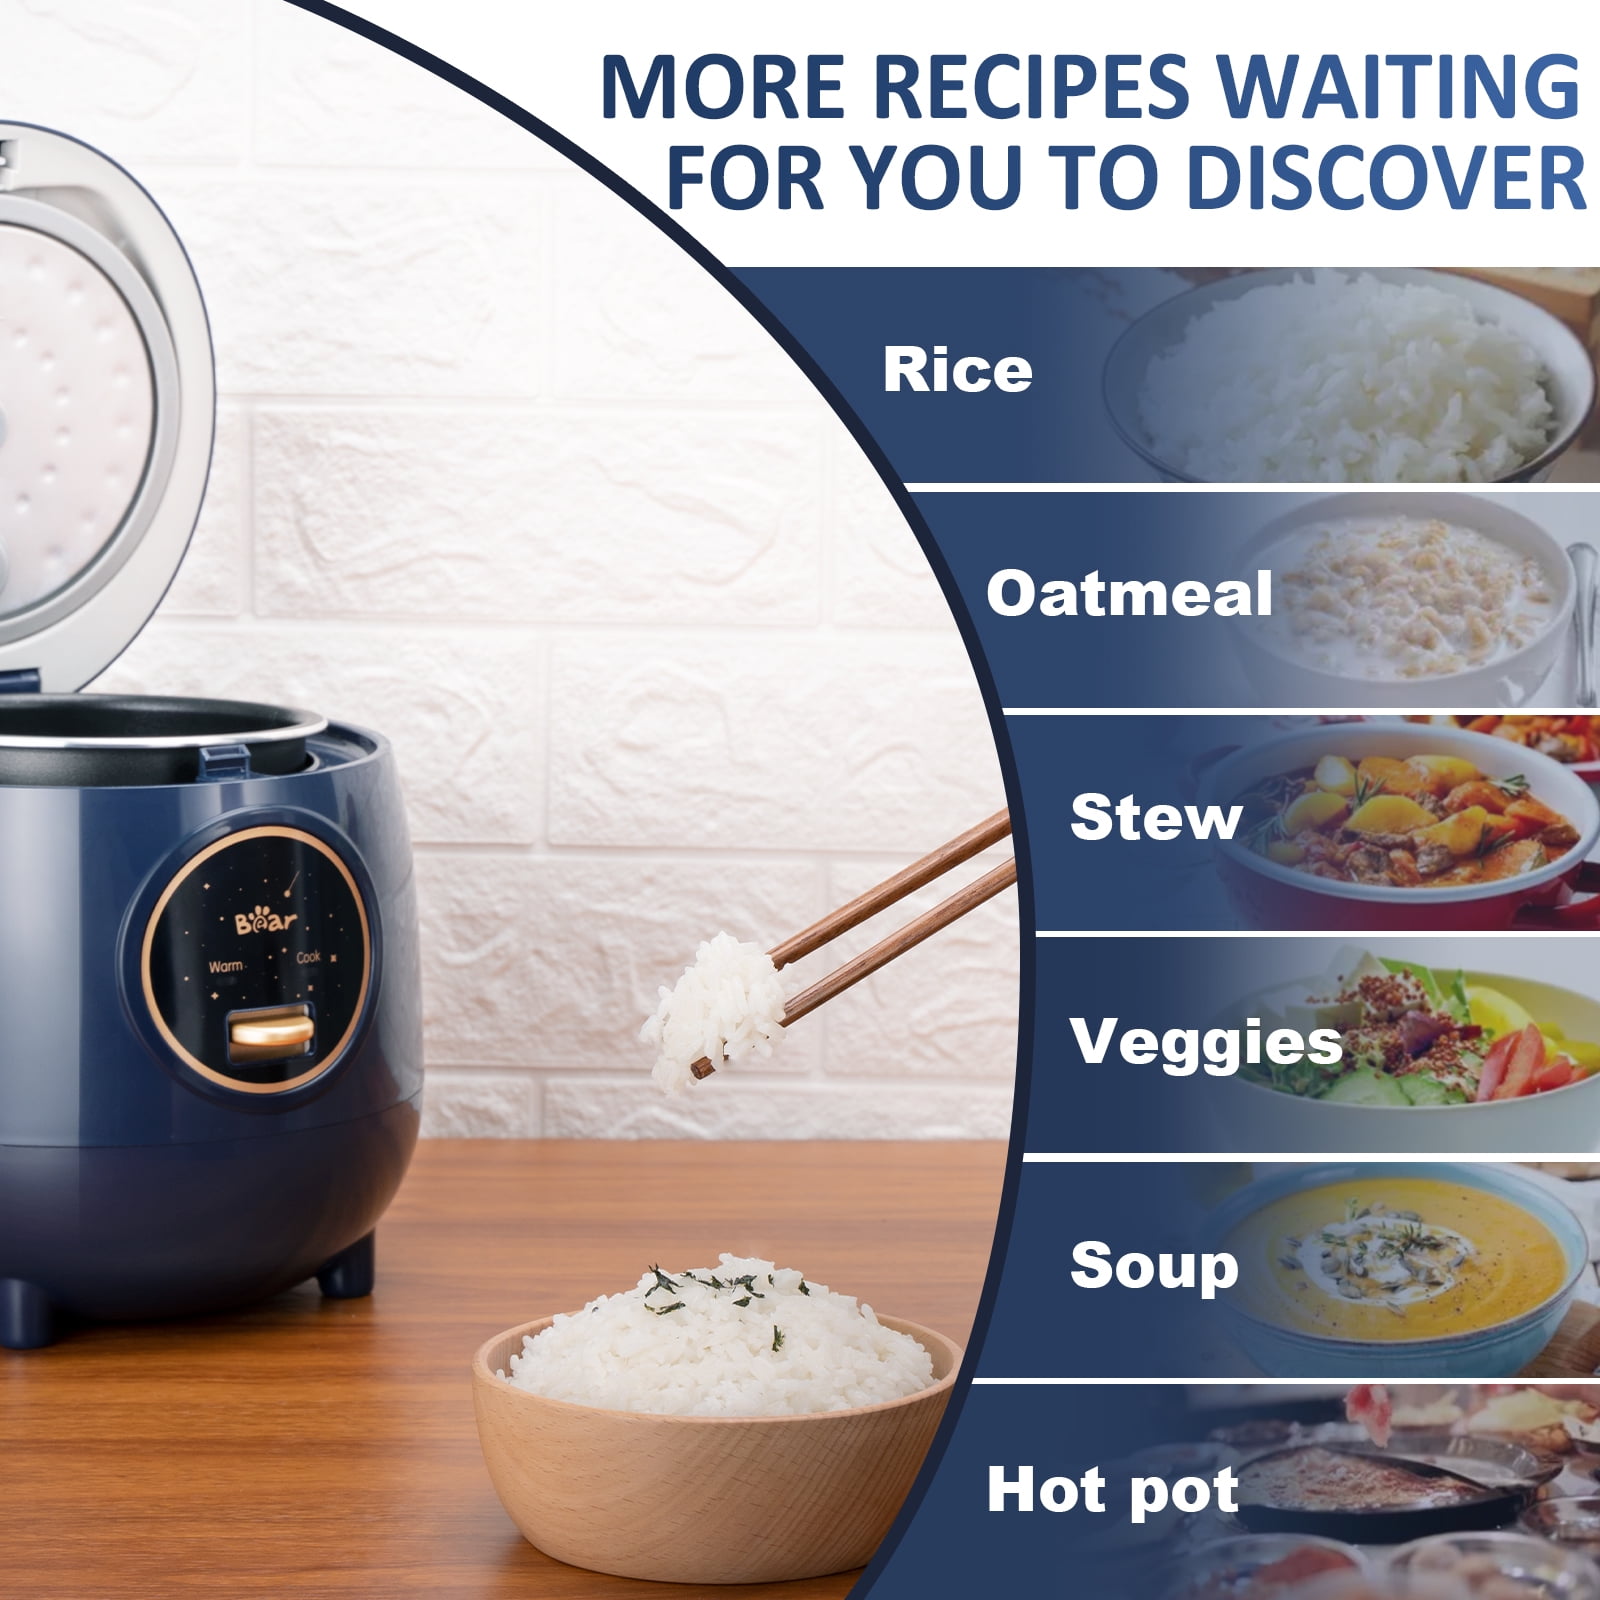 Bear Rice Cooker 4 Cups (UnCooked), Rice Cooker Small, 6 Cooking Functions,  Advanced Fuzzy Logic Micom Technology, 24 Hours Preset Keep Warm, for